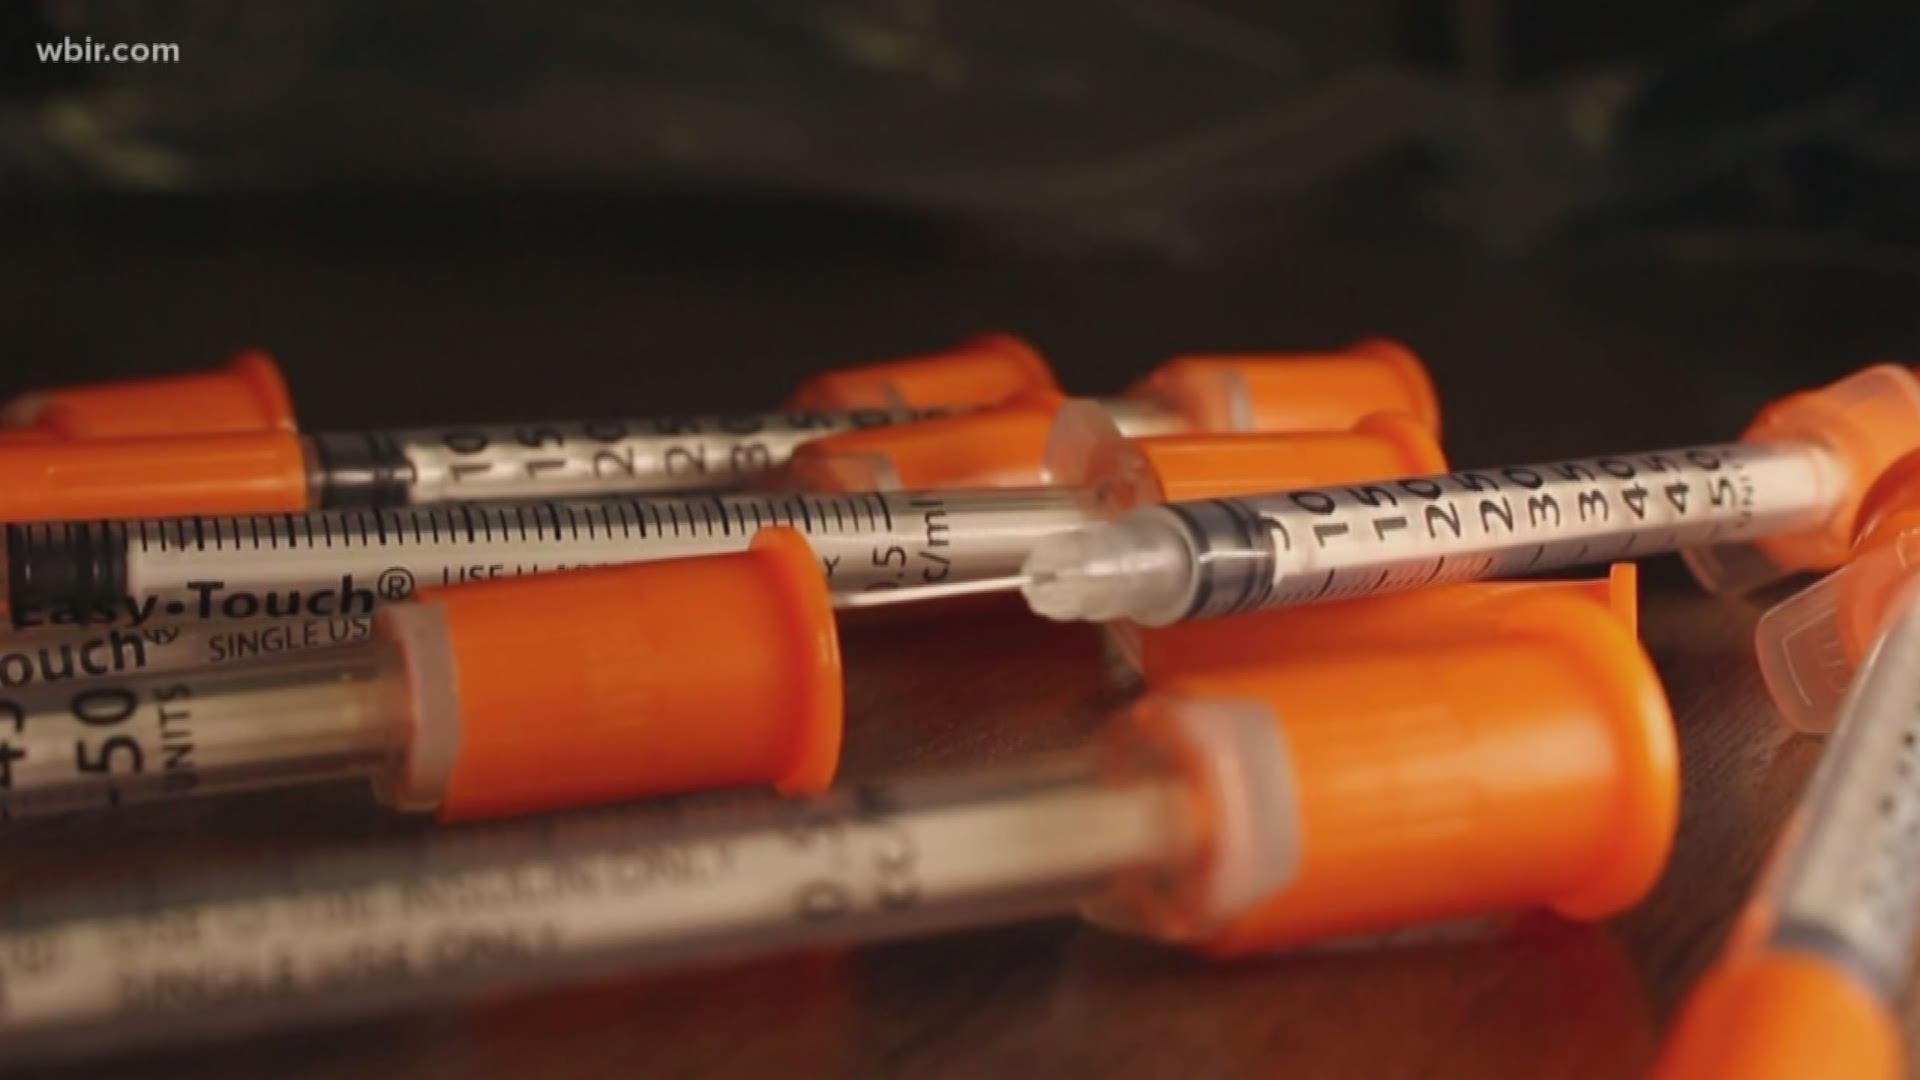 A new program in Knoxville aims to reduce the spread of disease and curb the overdose epidemic.The Syringe Service Program allows drug users to exchange dirty syringes used to get high for clean ones, all anonymously and for free.